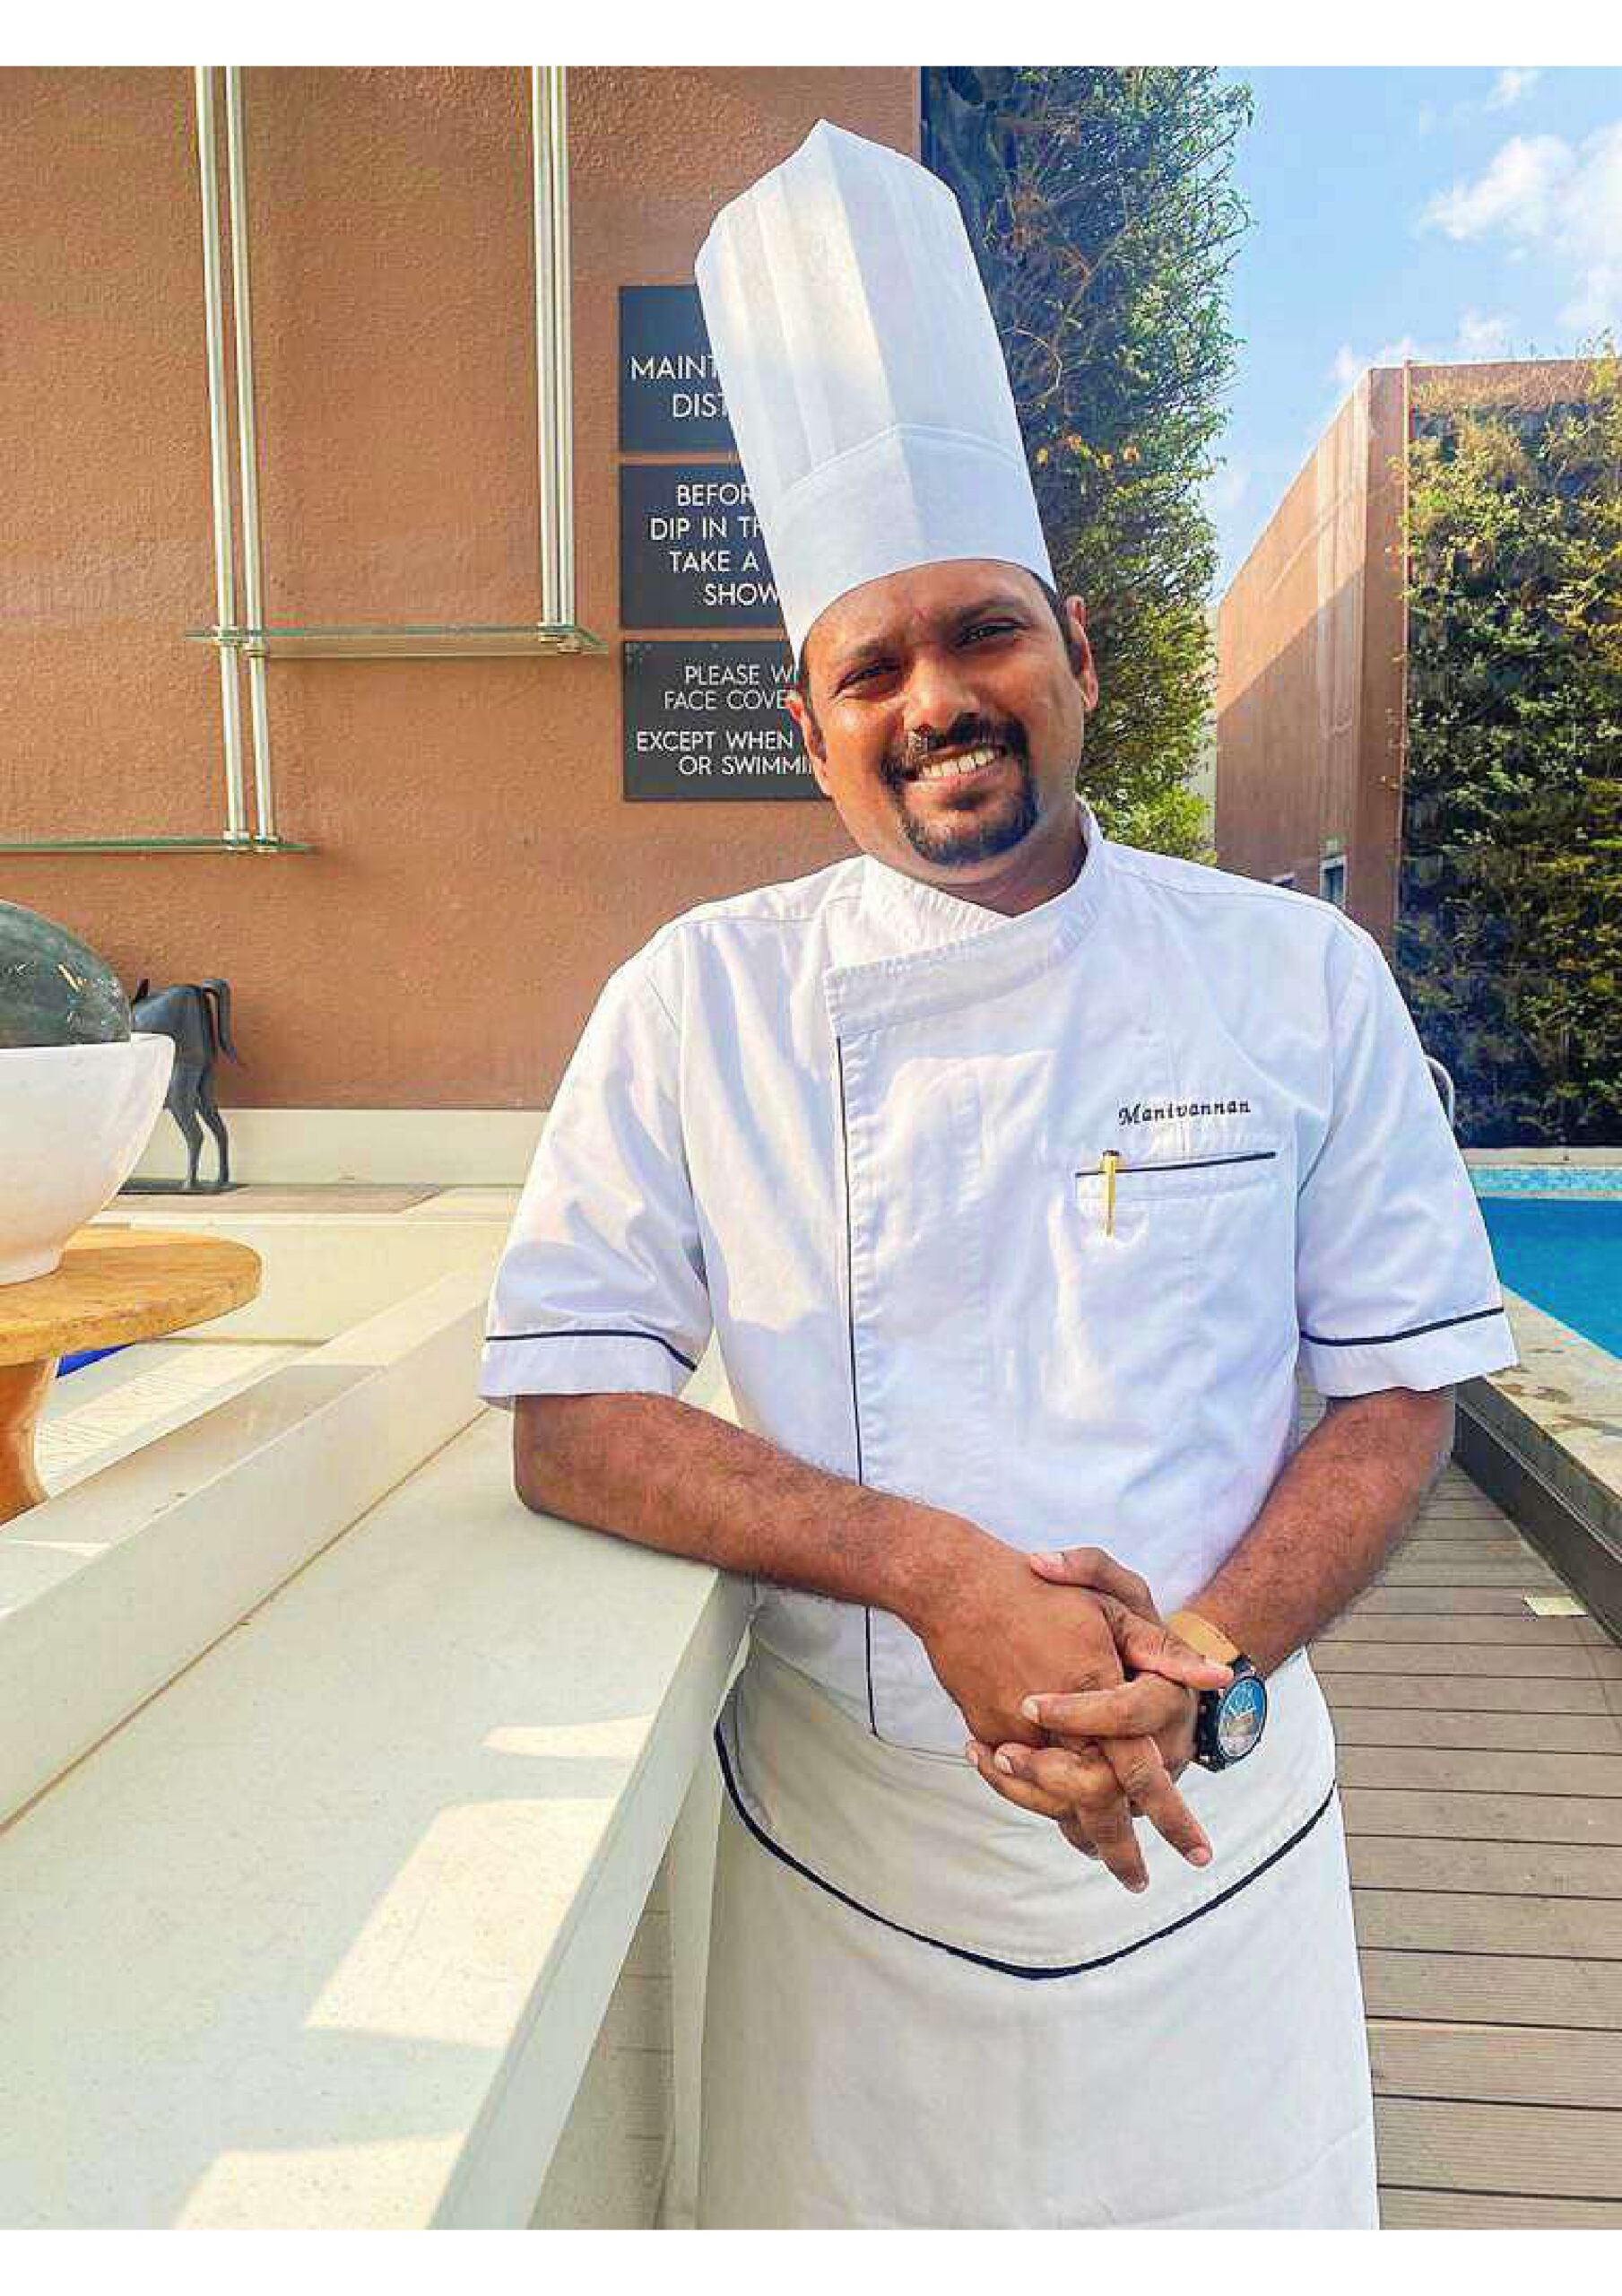 Renaissance Bengaluru Race Course Hotel Appoints G. Manivannan as the new Pastry Chef to Elevate The Culinary Experience